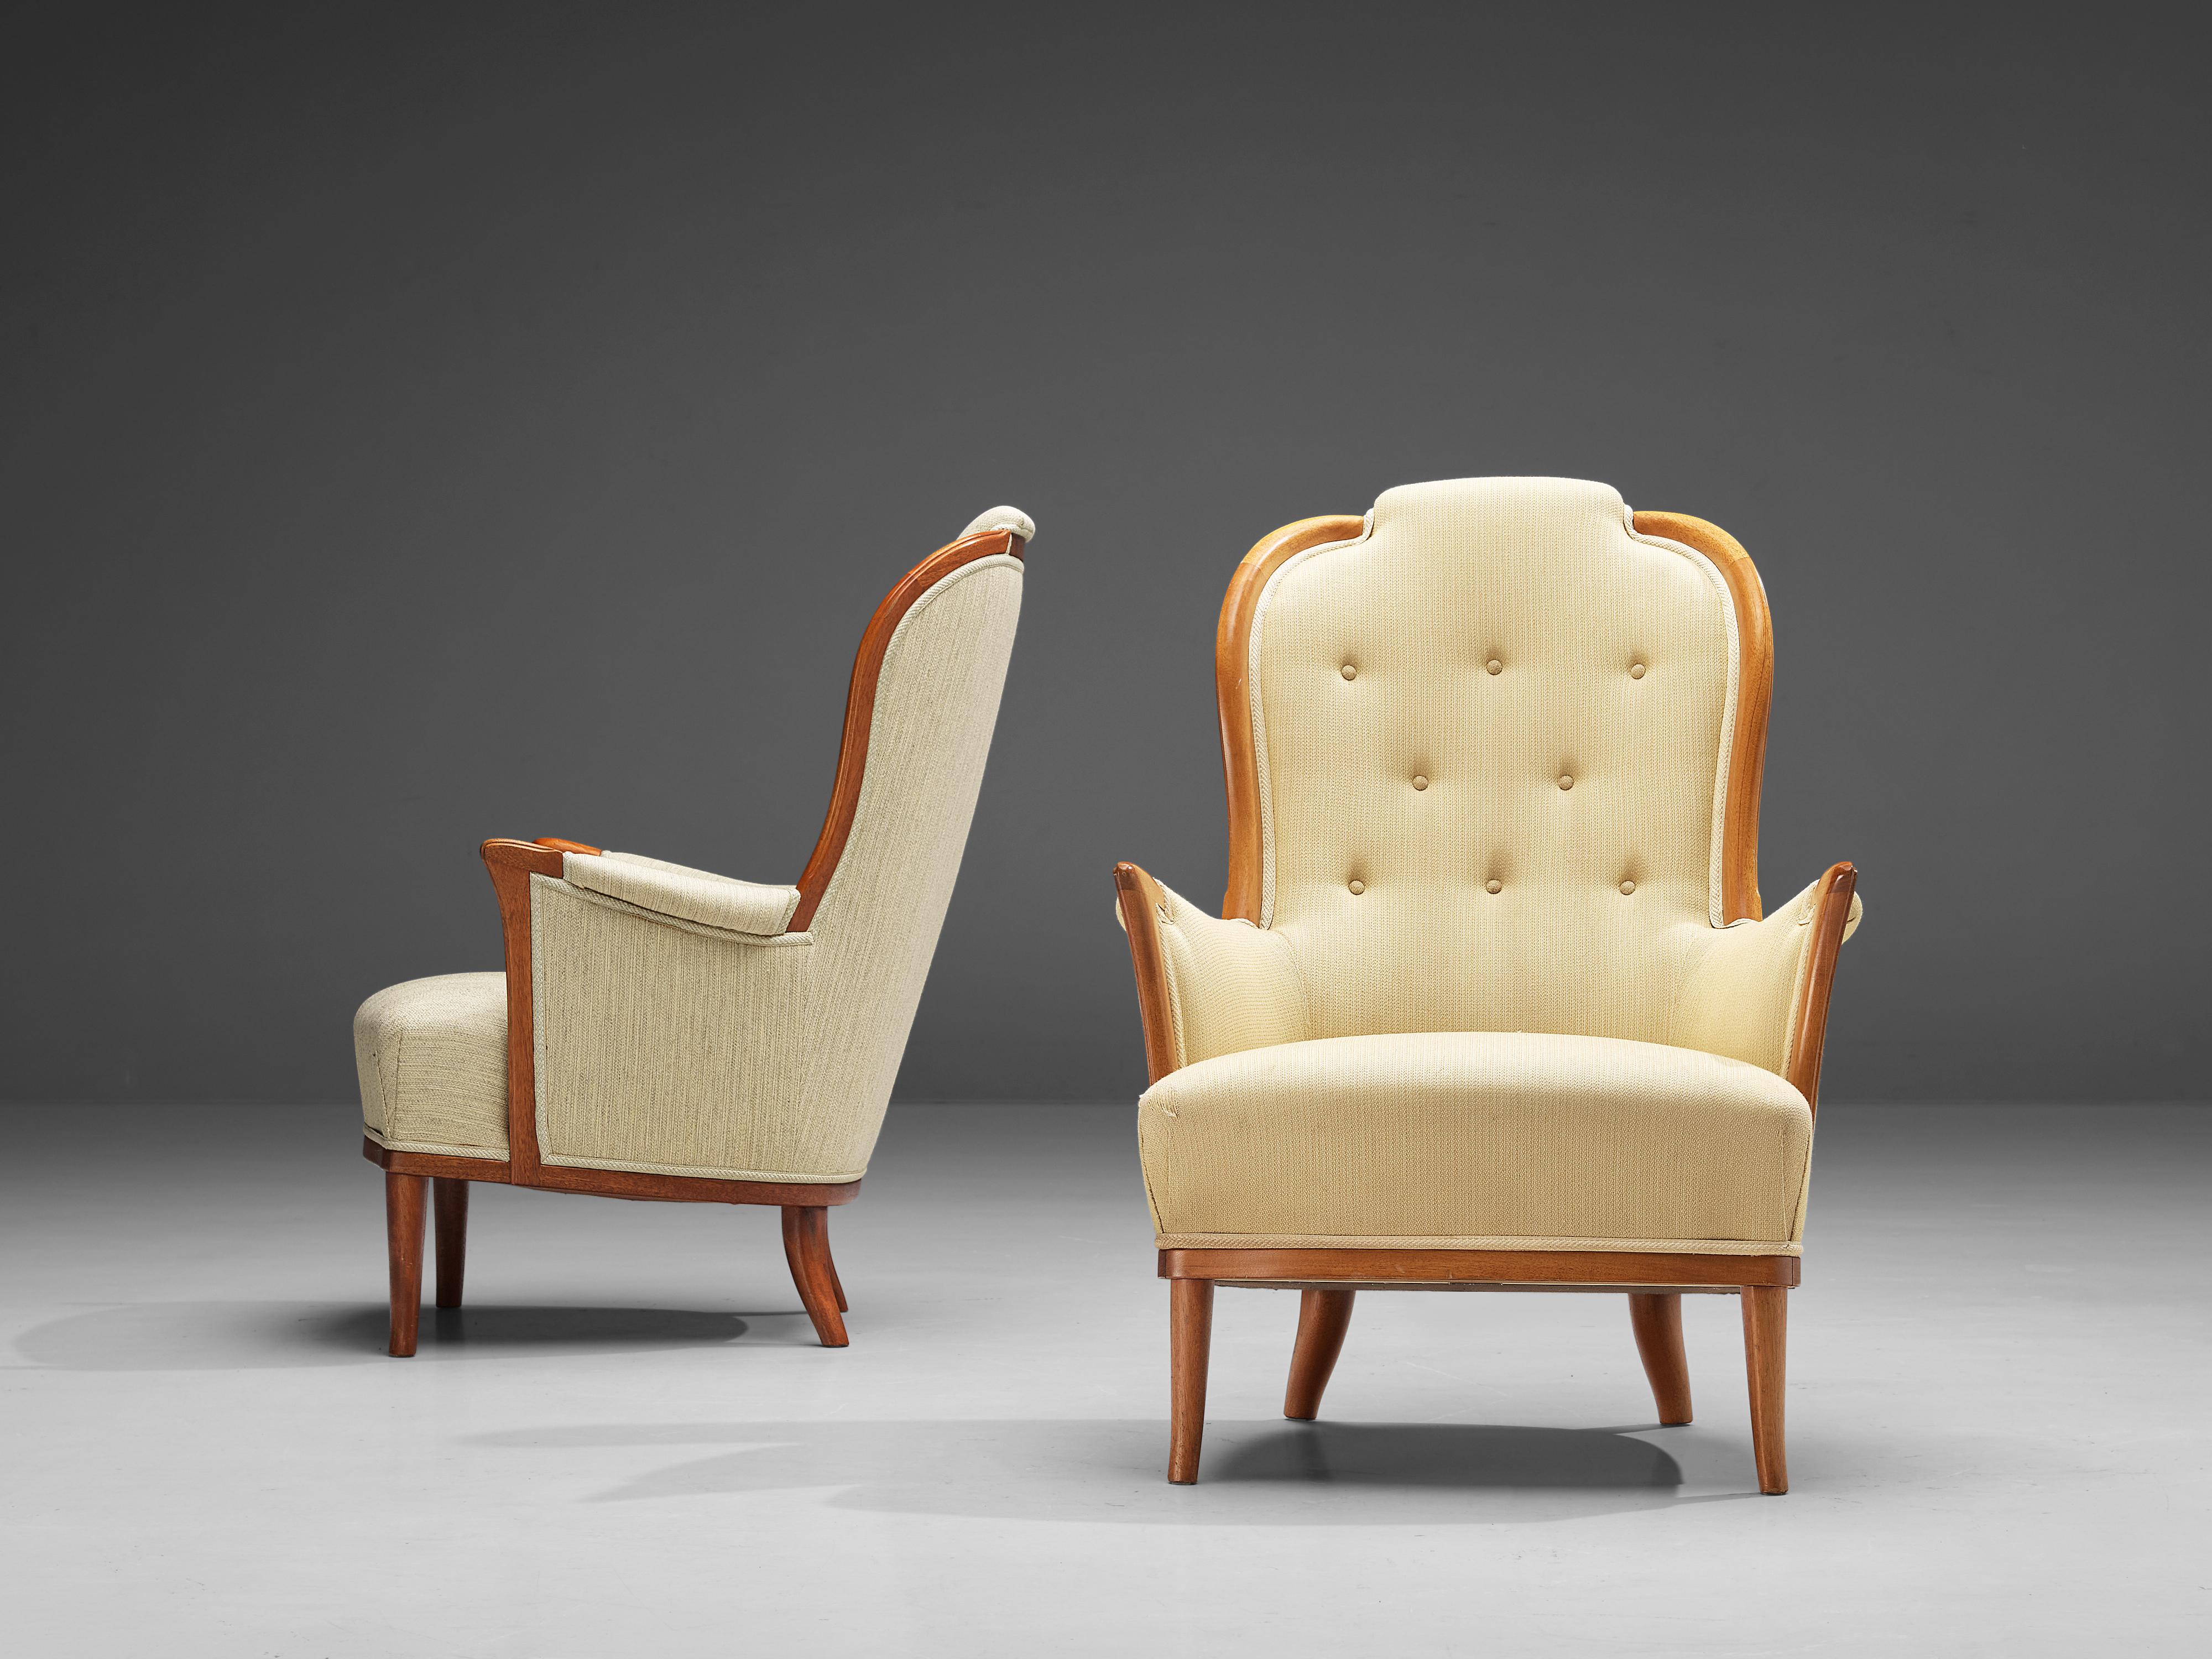 Carl Malmsten for O.H. Sjögren, 'Our Lady' pair of lounge chairs, teak, fabric, Sweden, 1950s. 

Very interesting pair of Swedish lounge chairs by Carl Malmsten in off-white and pastel yellow fabric with tufted back. The distinctive lines and